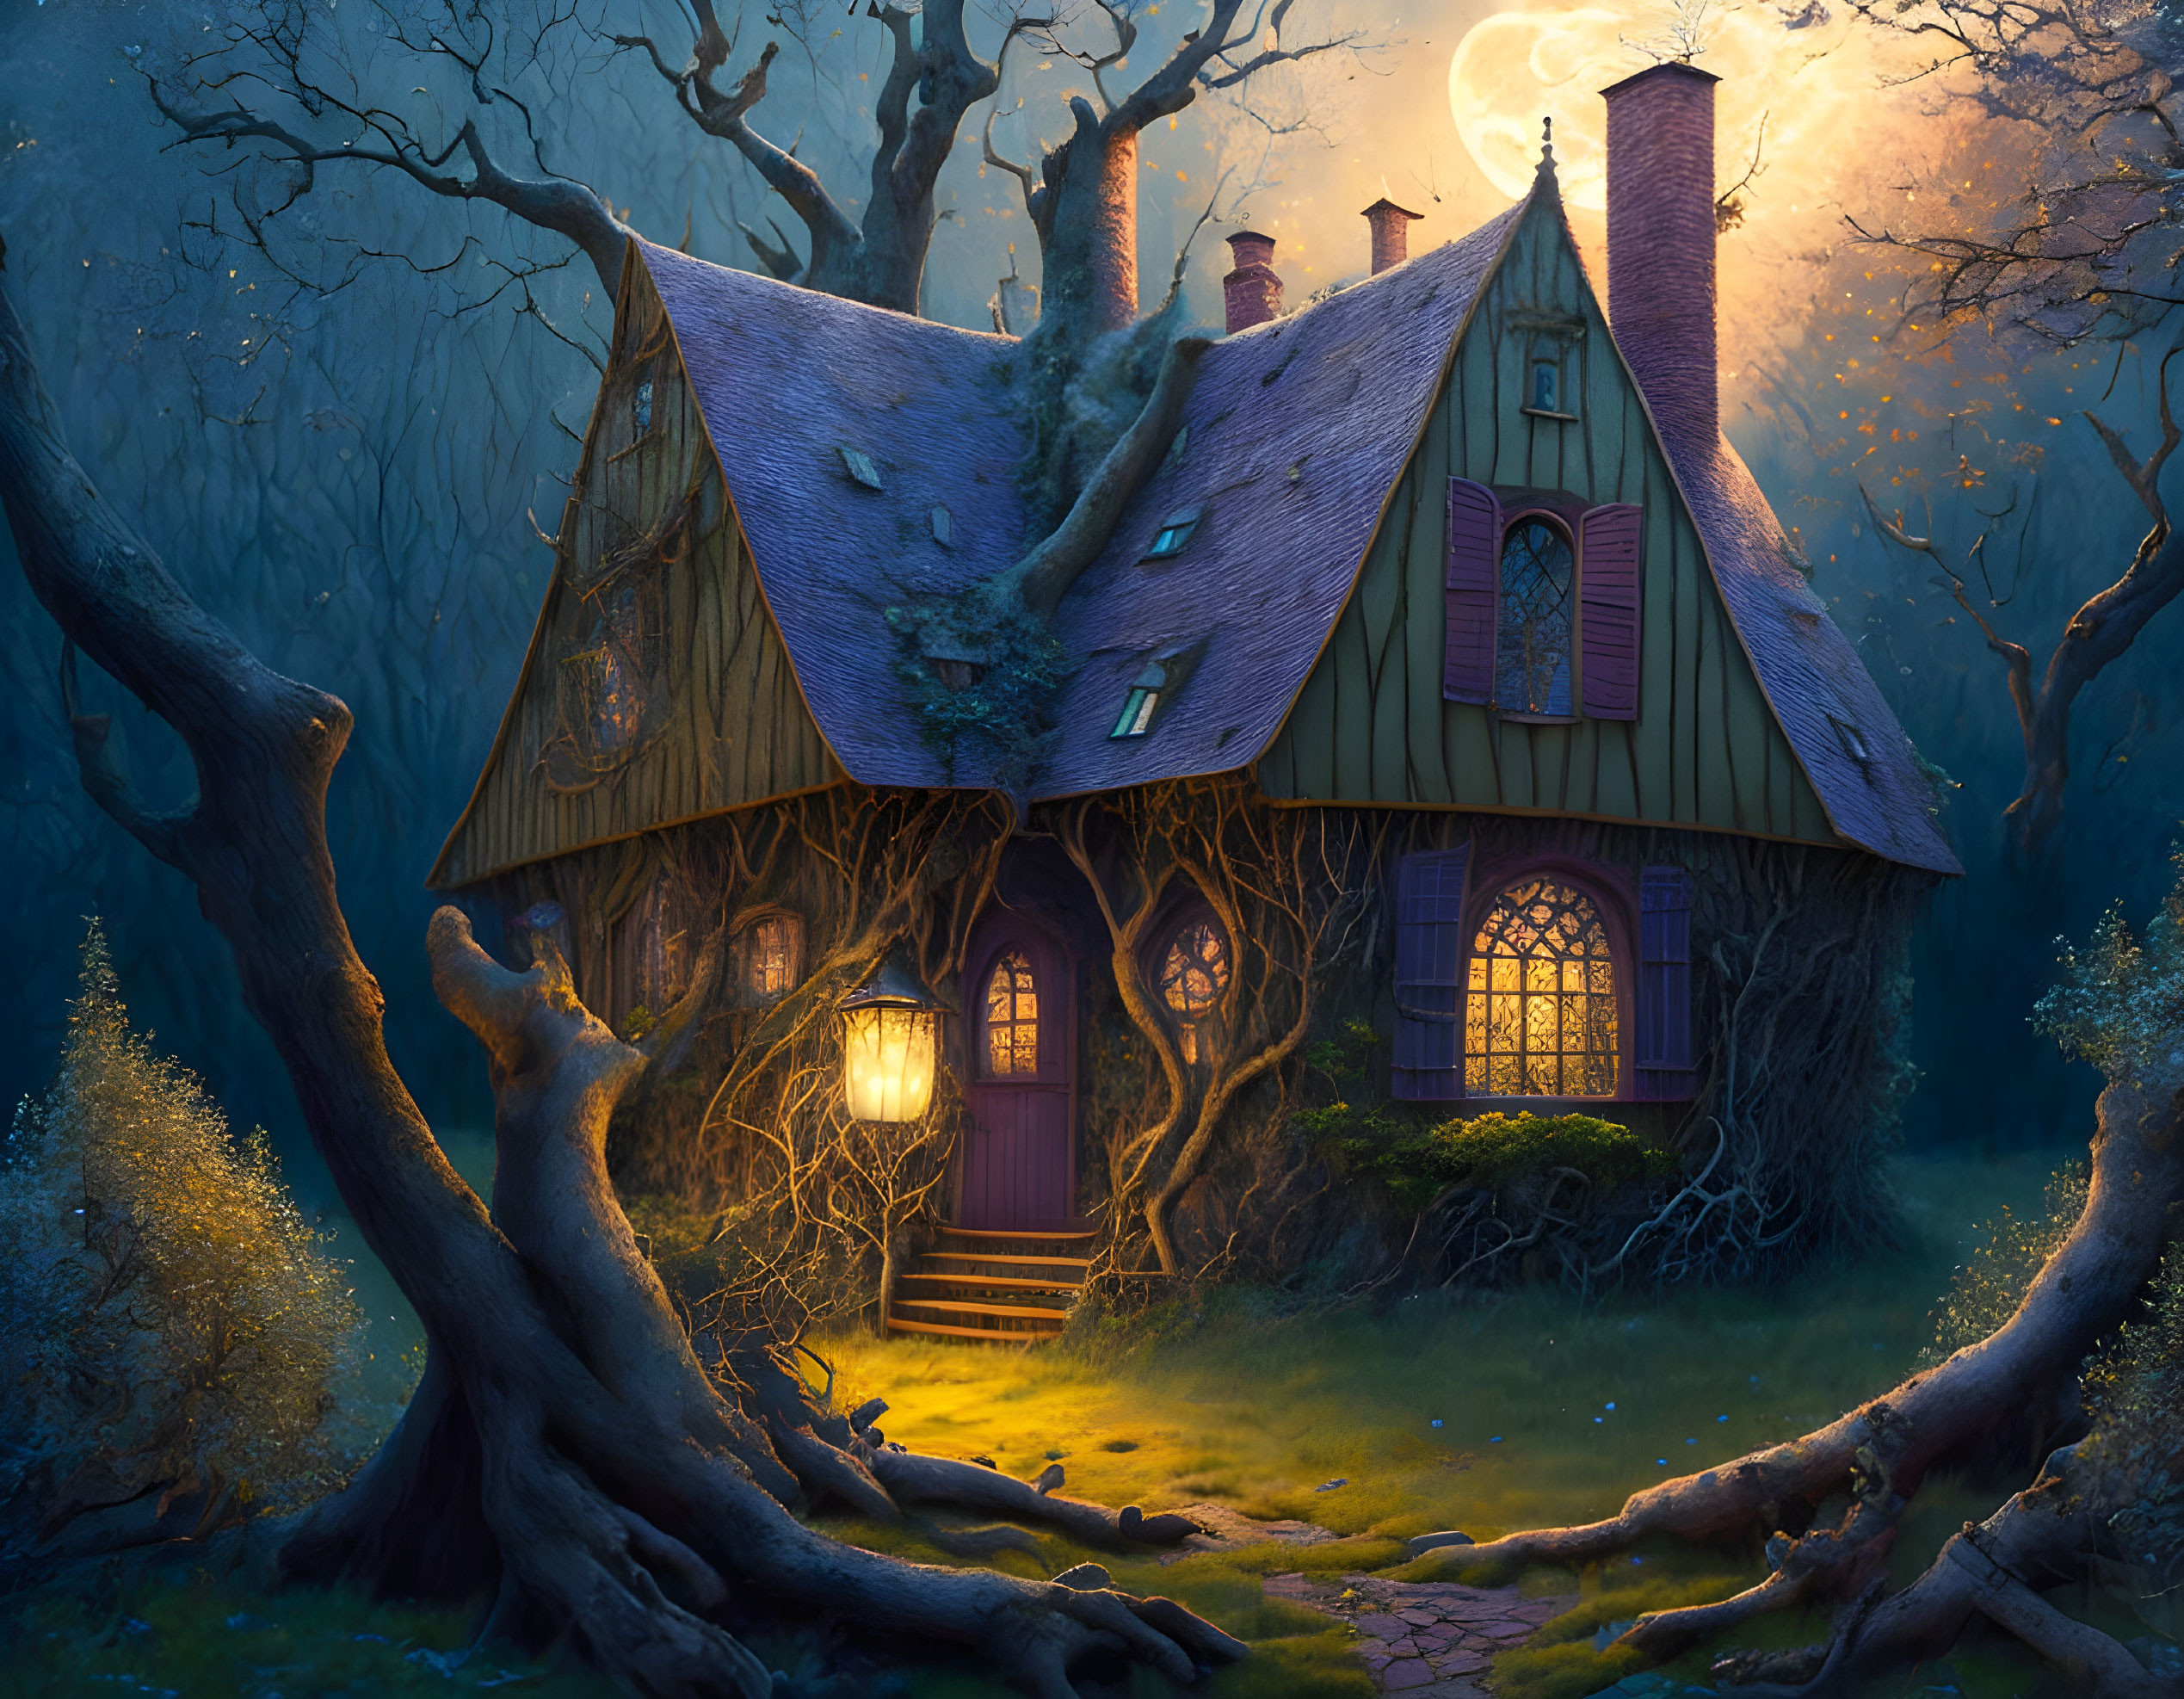 An old witch's house